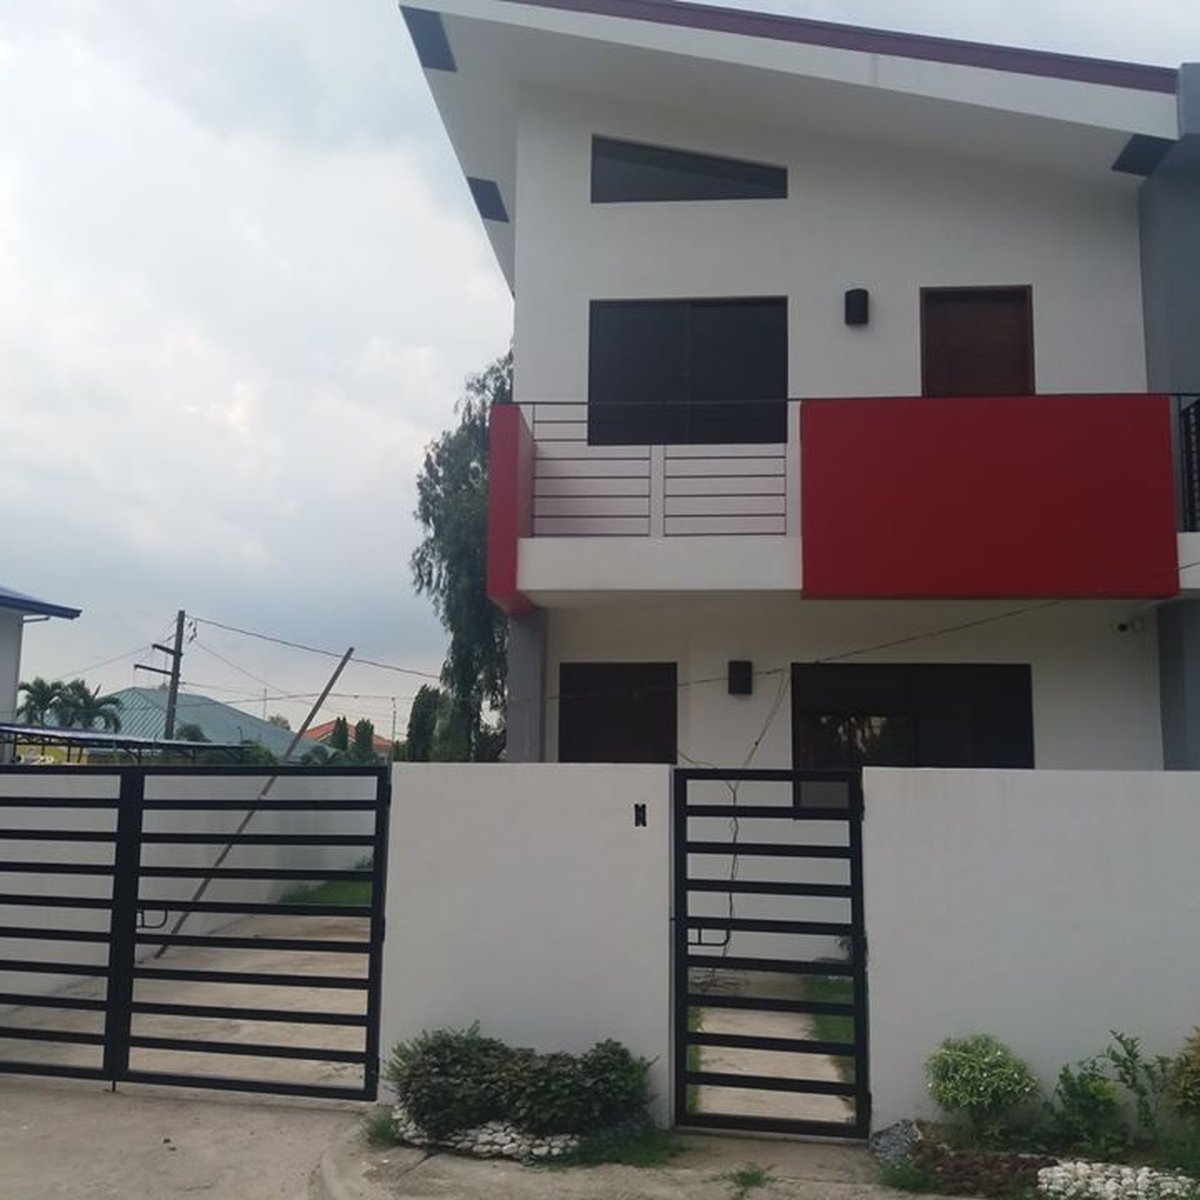 RFO 3-bedroom Single Attached House For Sale in Dasmarinas Cavite